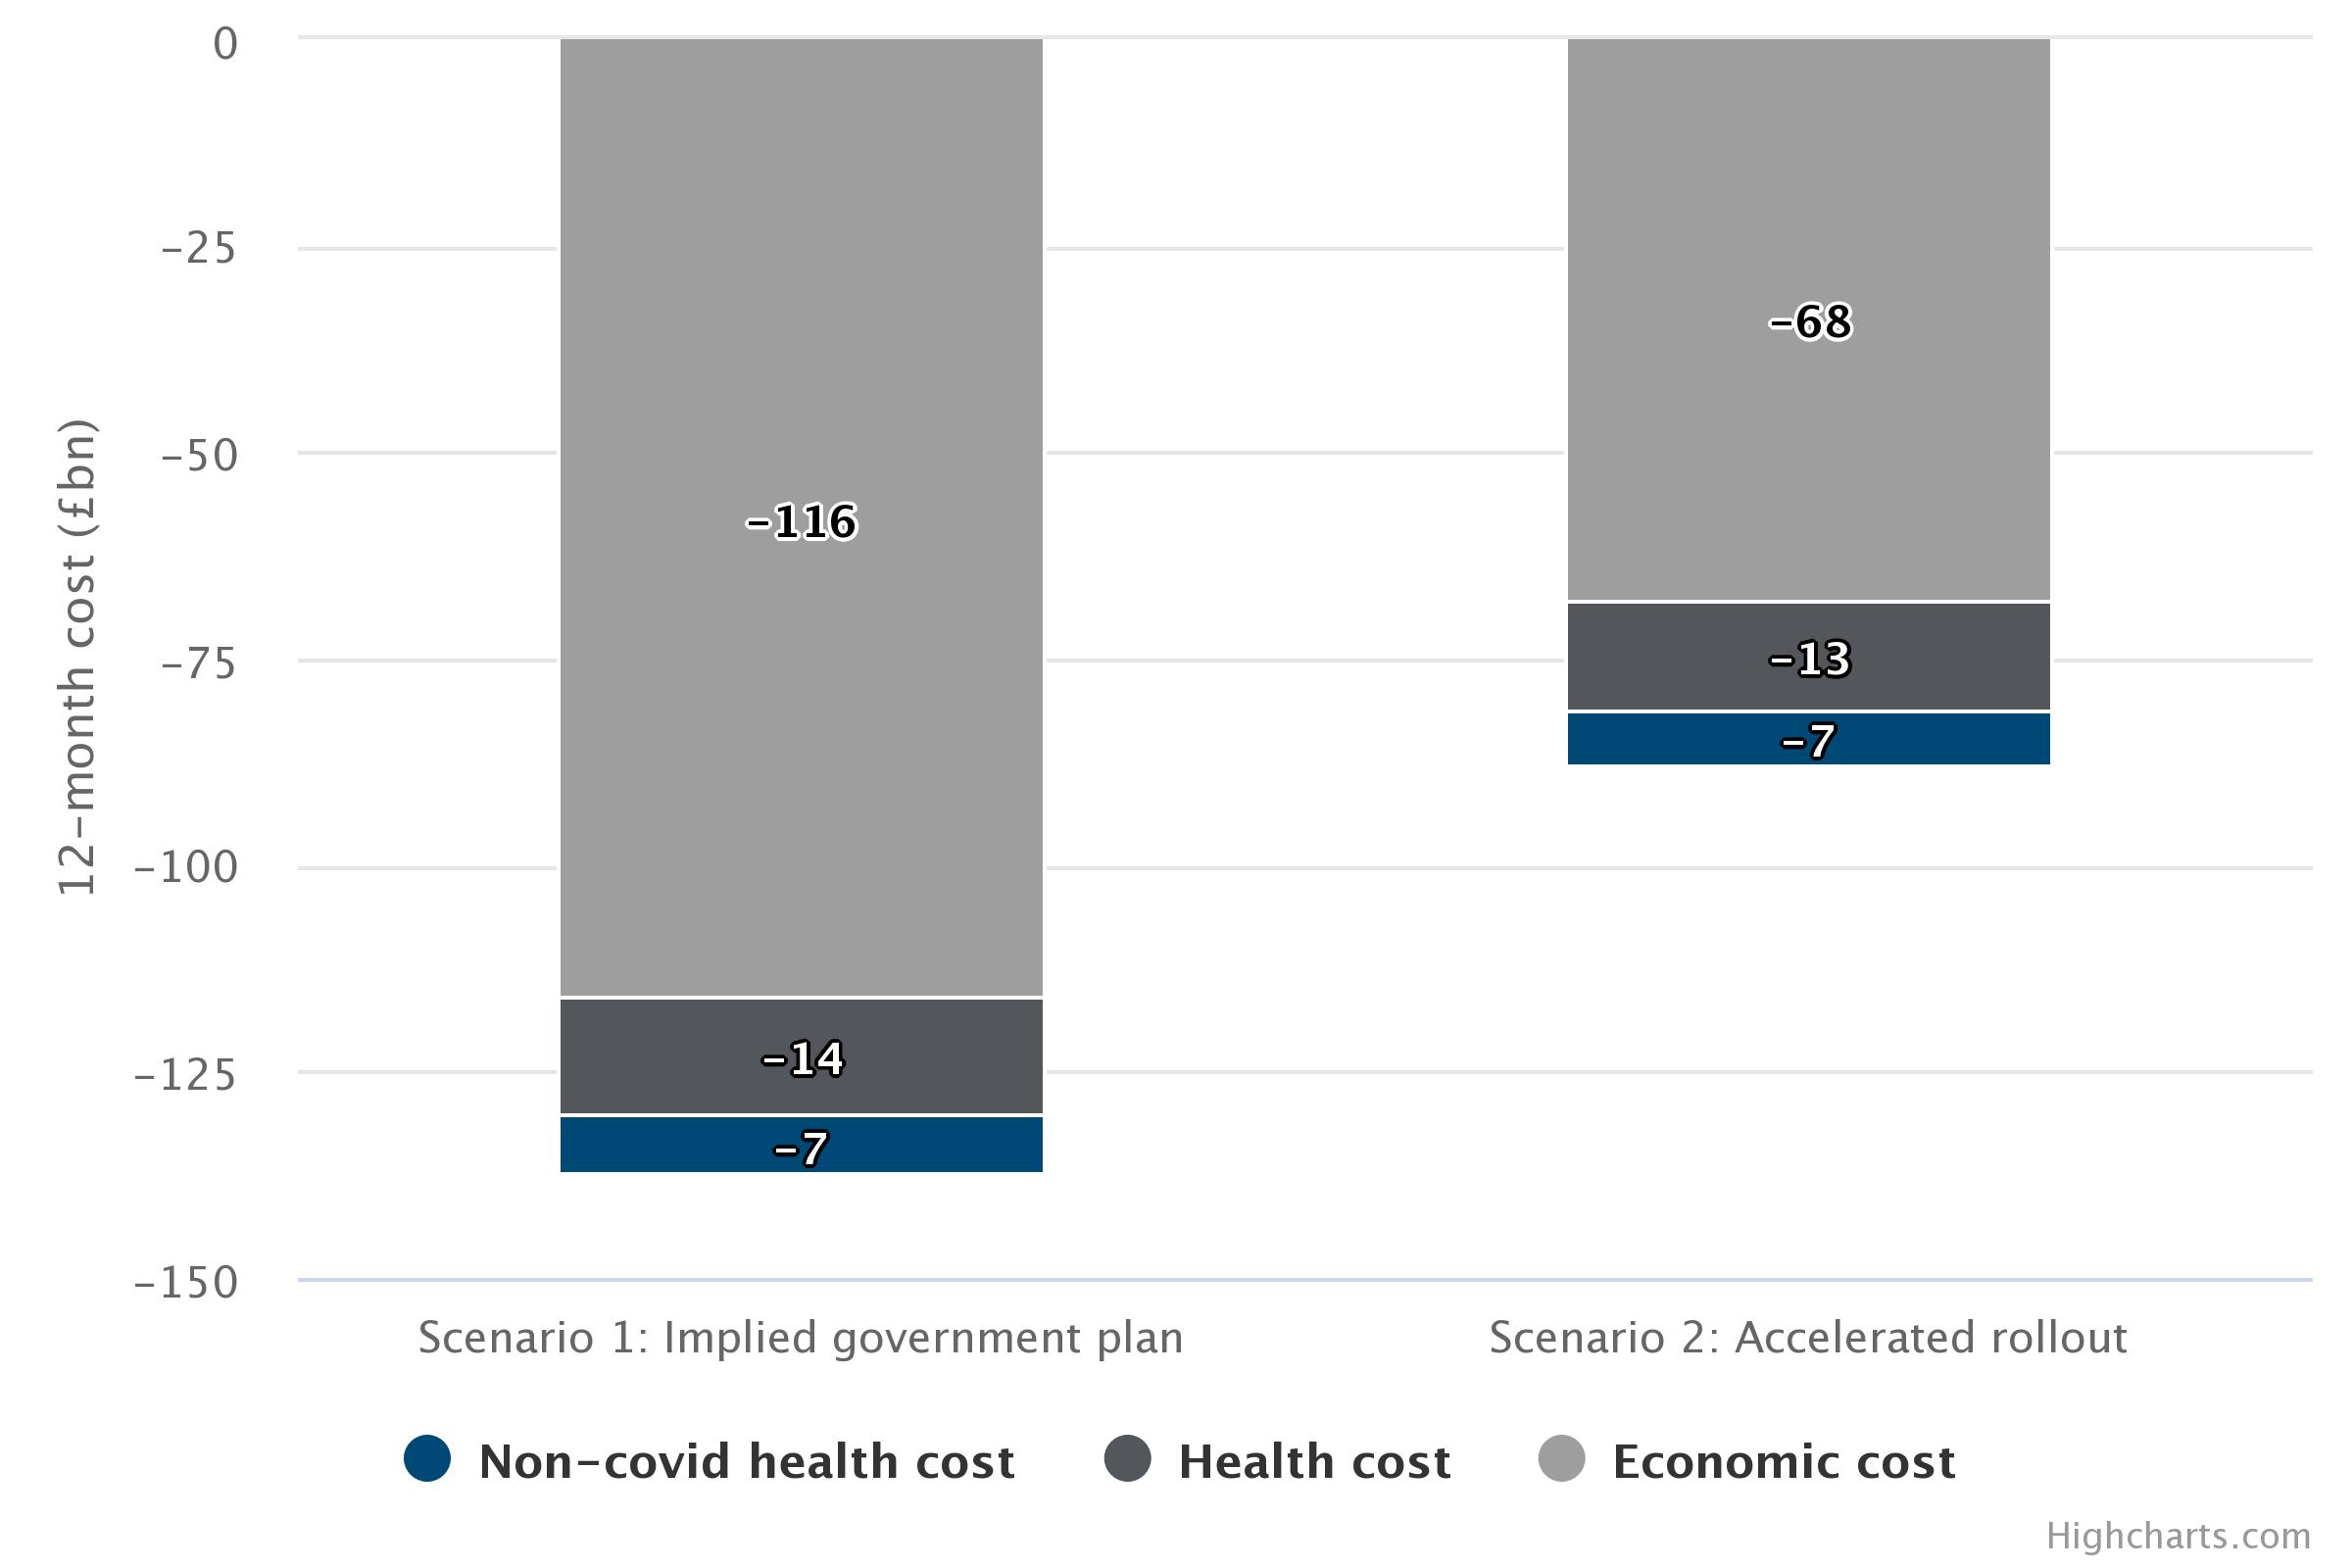 Total Covid-19 cost breakdown for 2021, under current and accelerated rollout plans